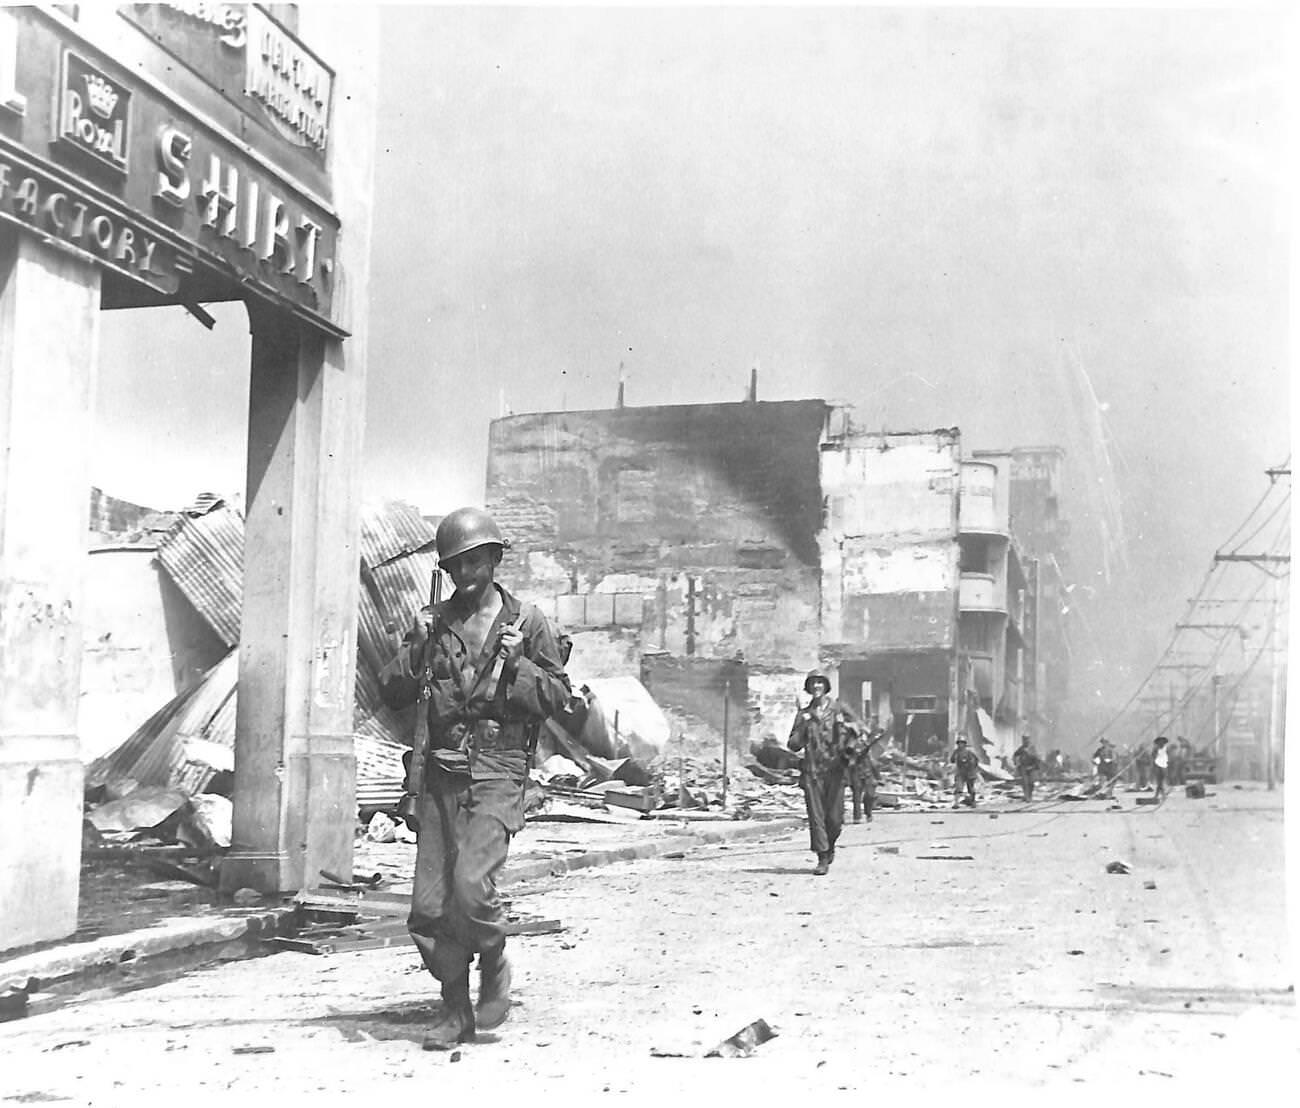 American troops navigate the destroyed business district of Manila en route to the front during the Battle of Manila, 1945.